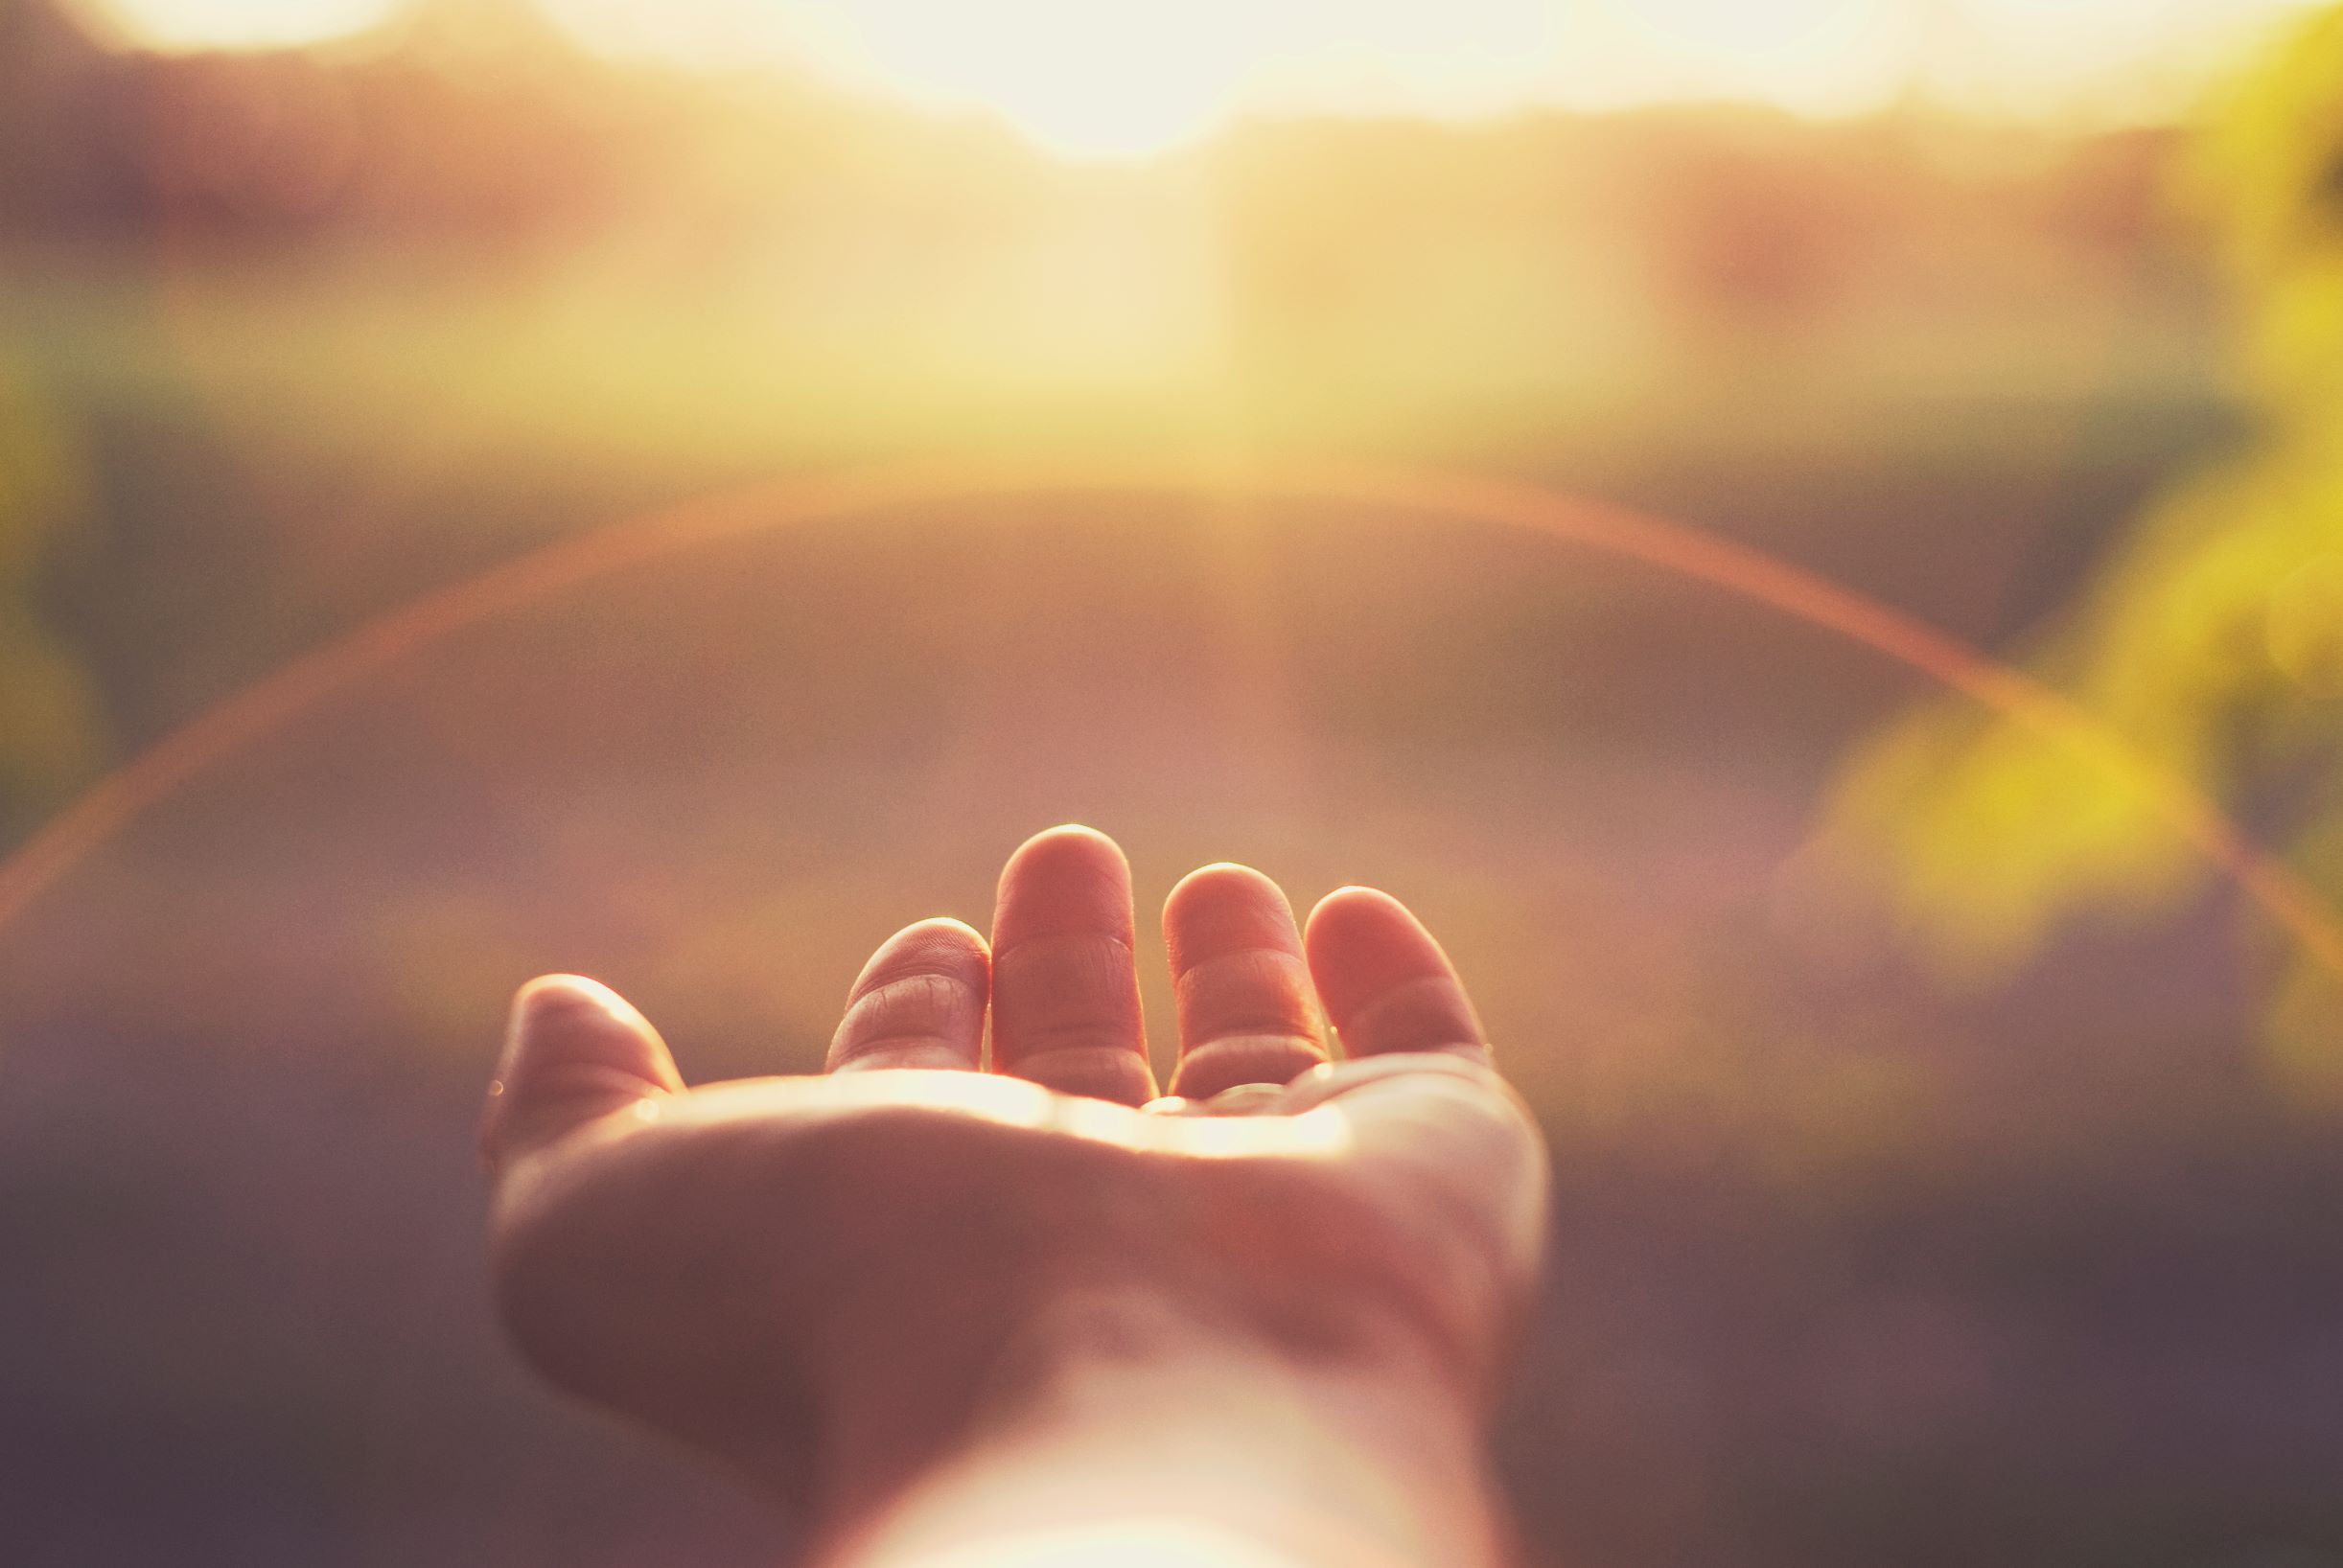 Picture of a hand reaching toward the sun